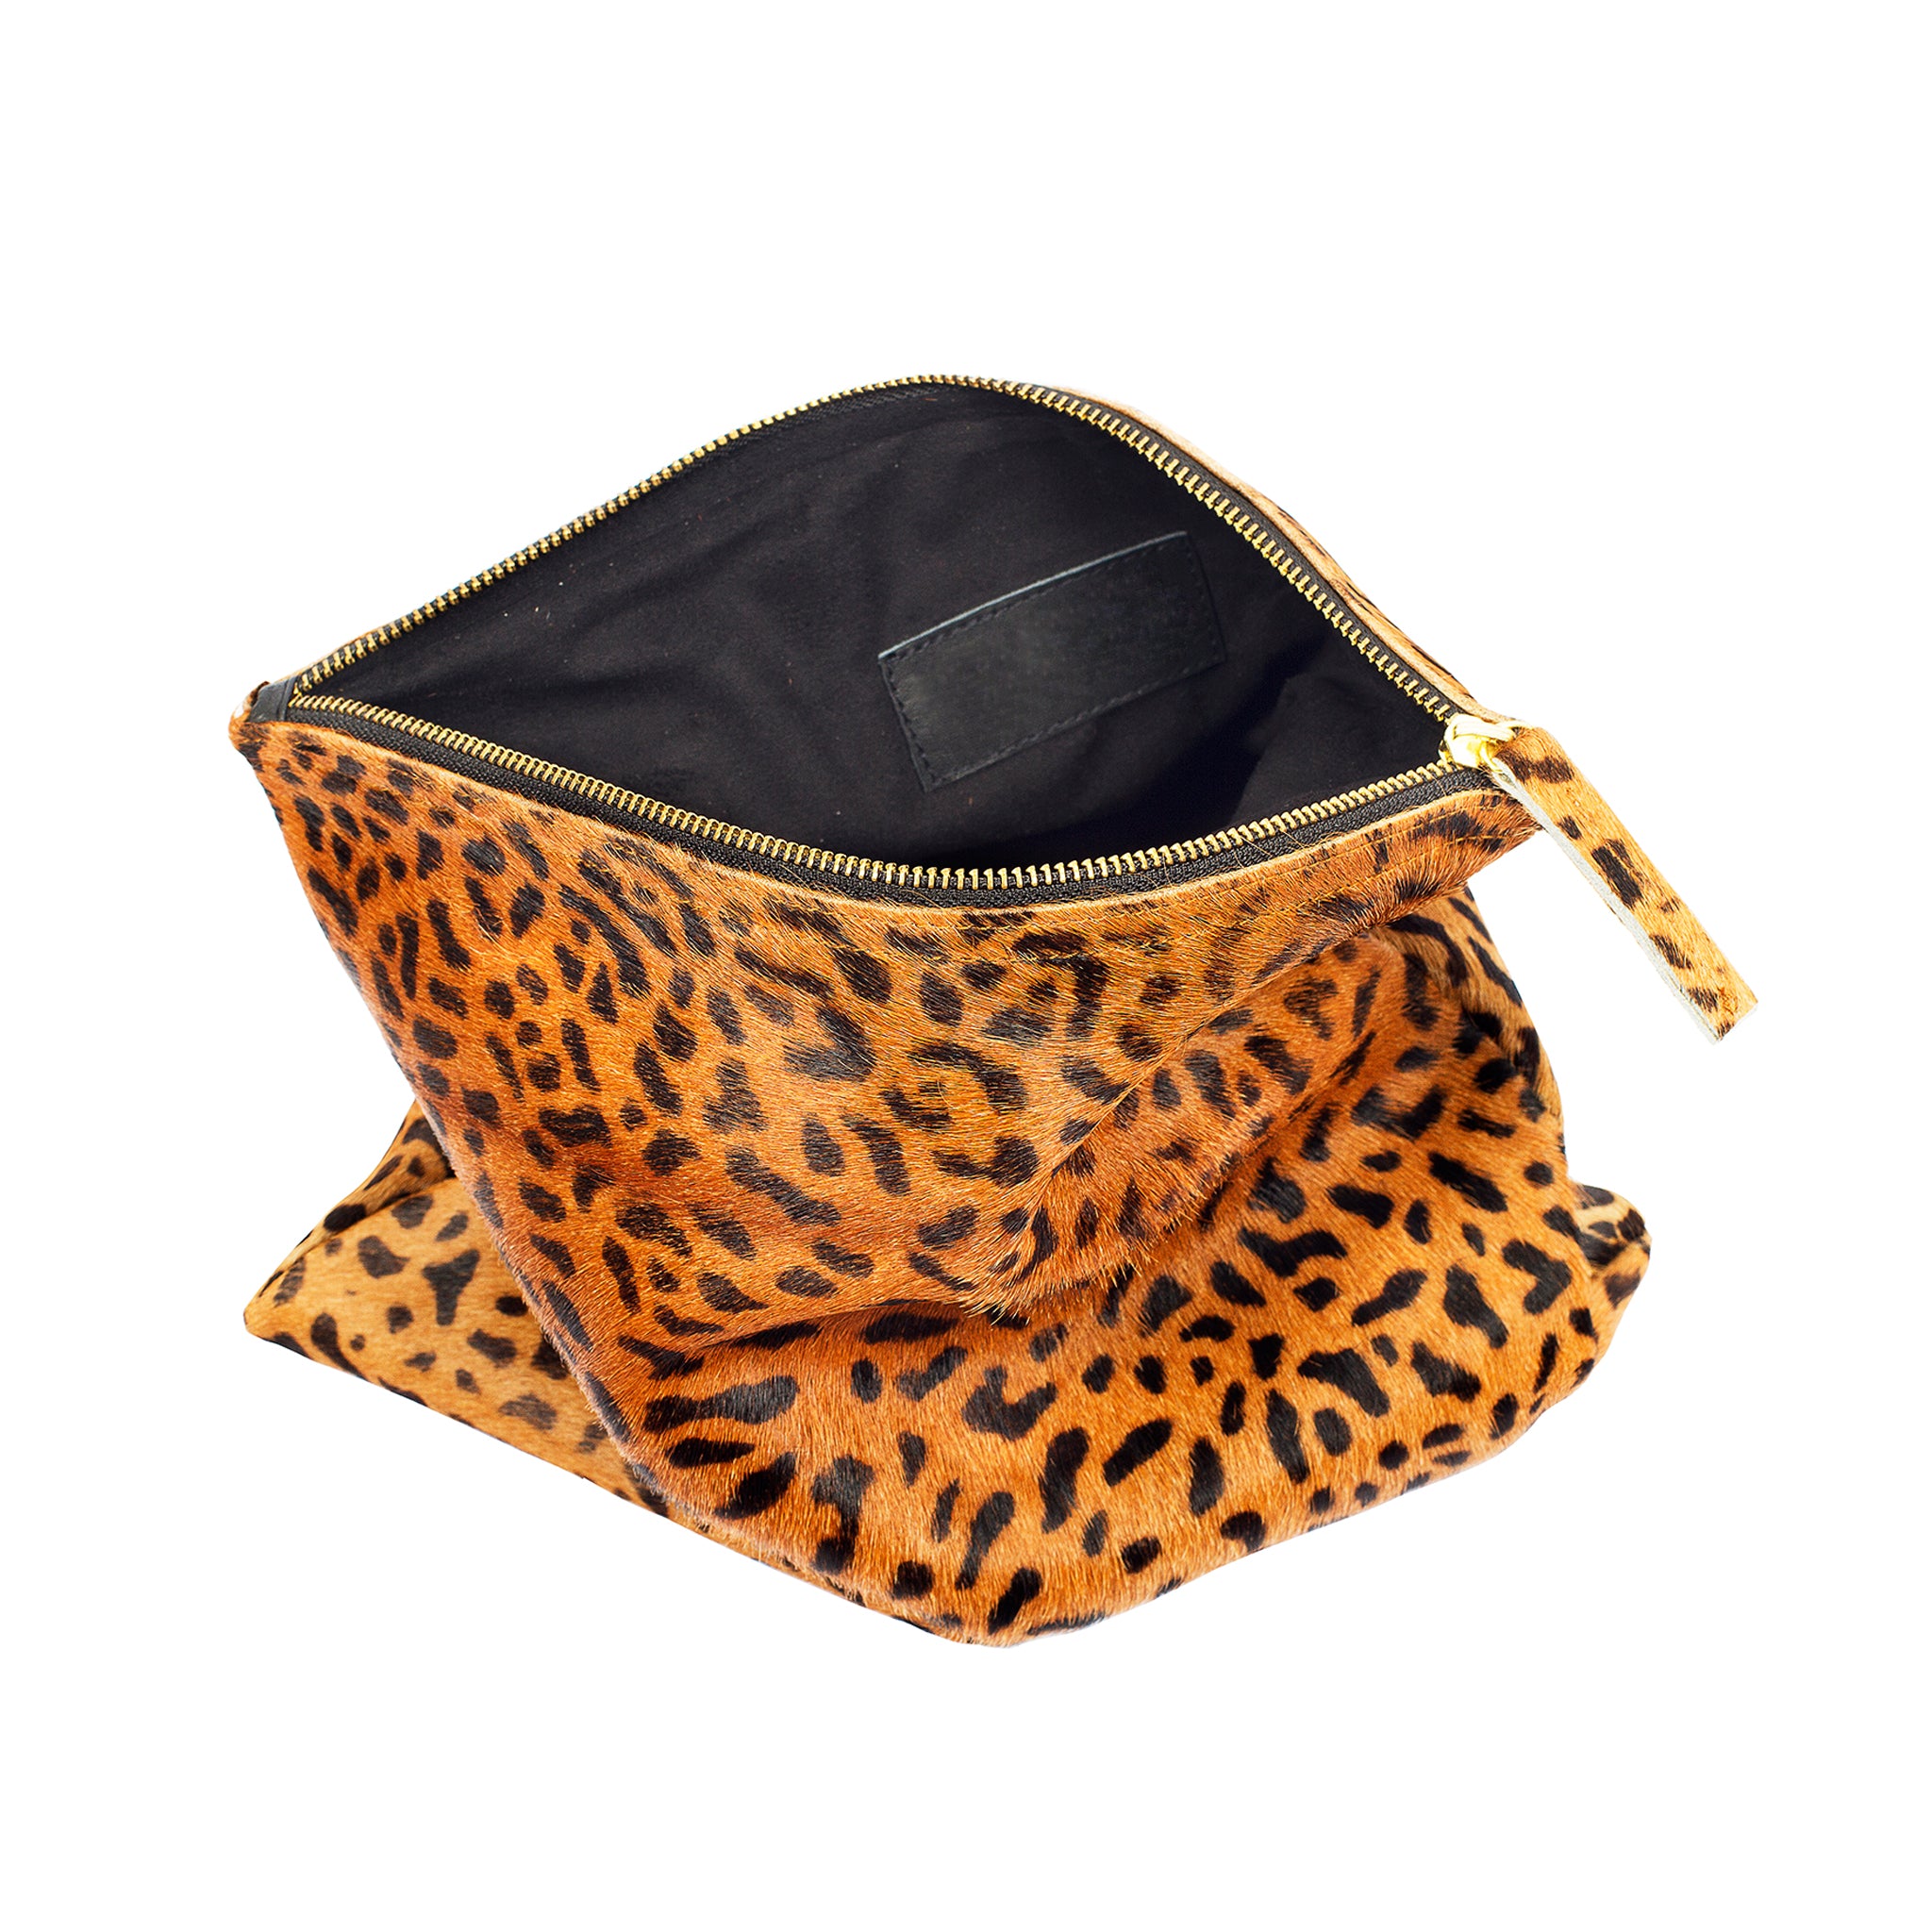 Exclusive Leopard Leather Clutch